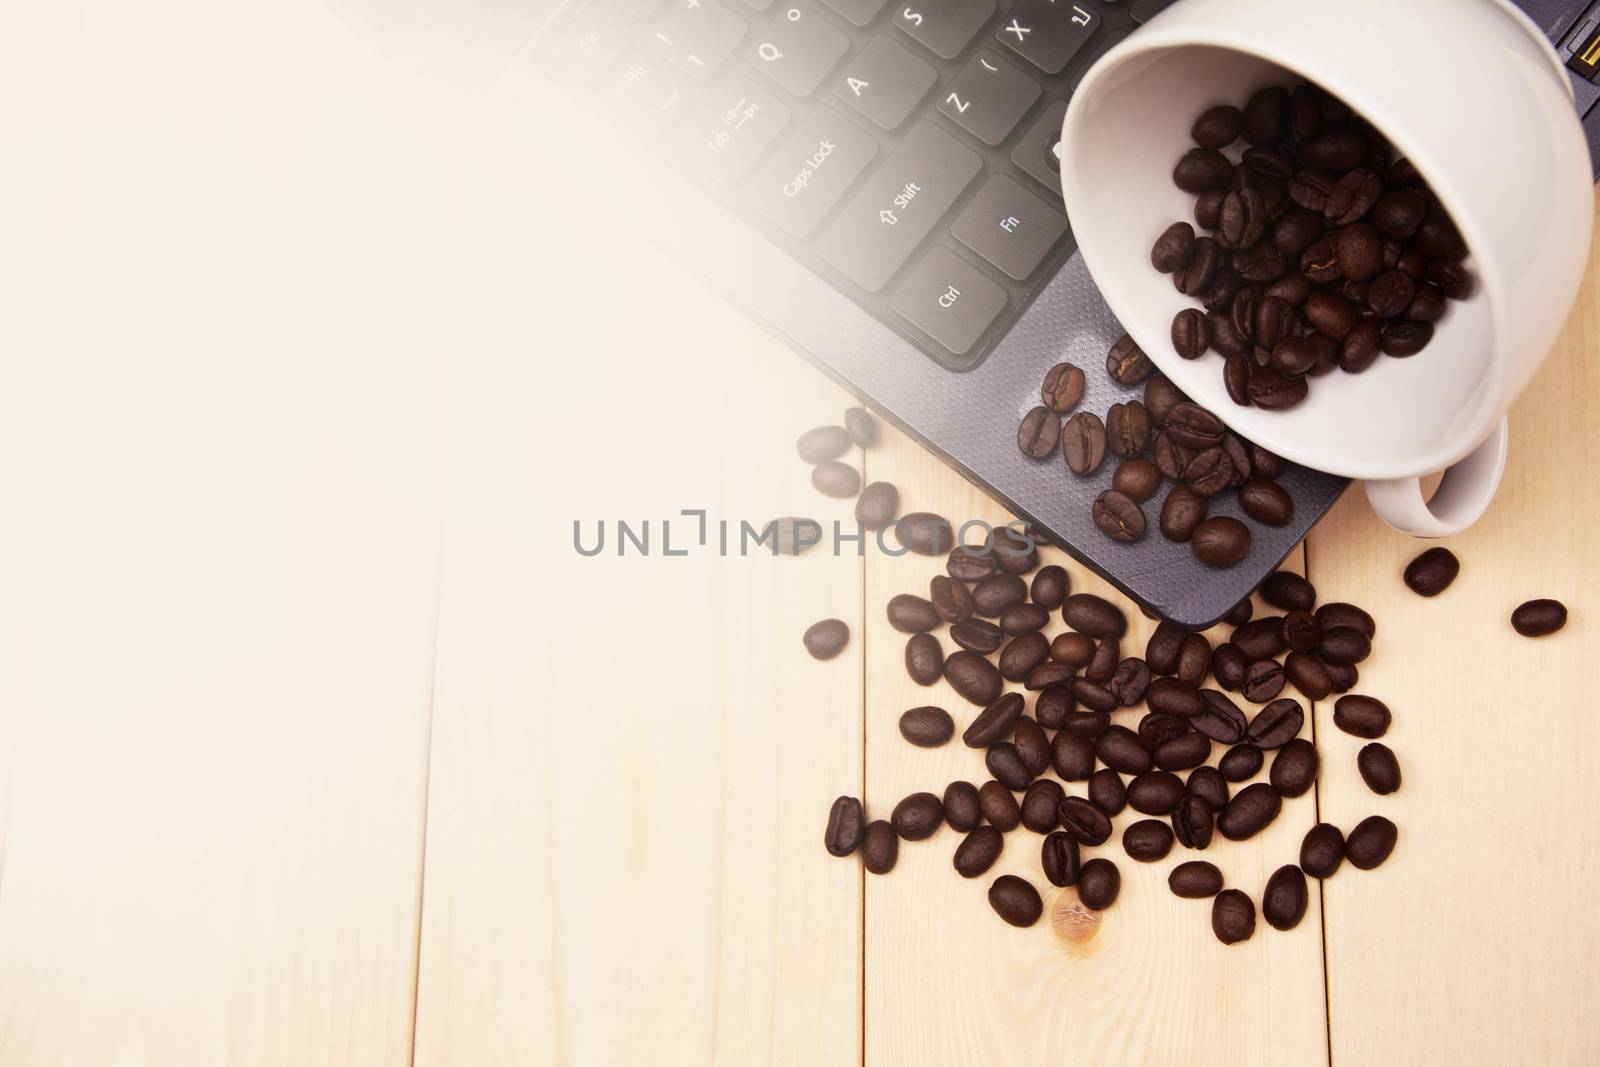 A cup of coffee put on table on laptop and spread coffee beans